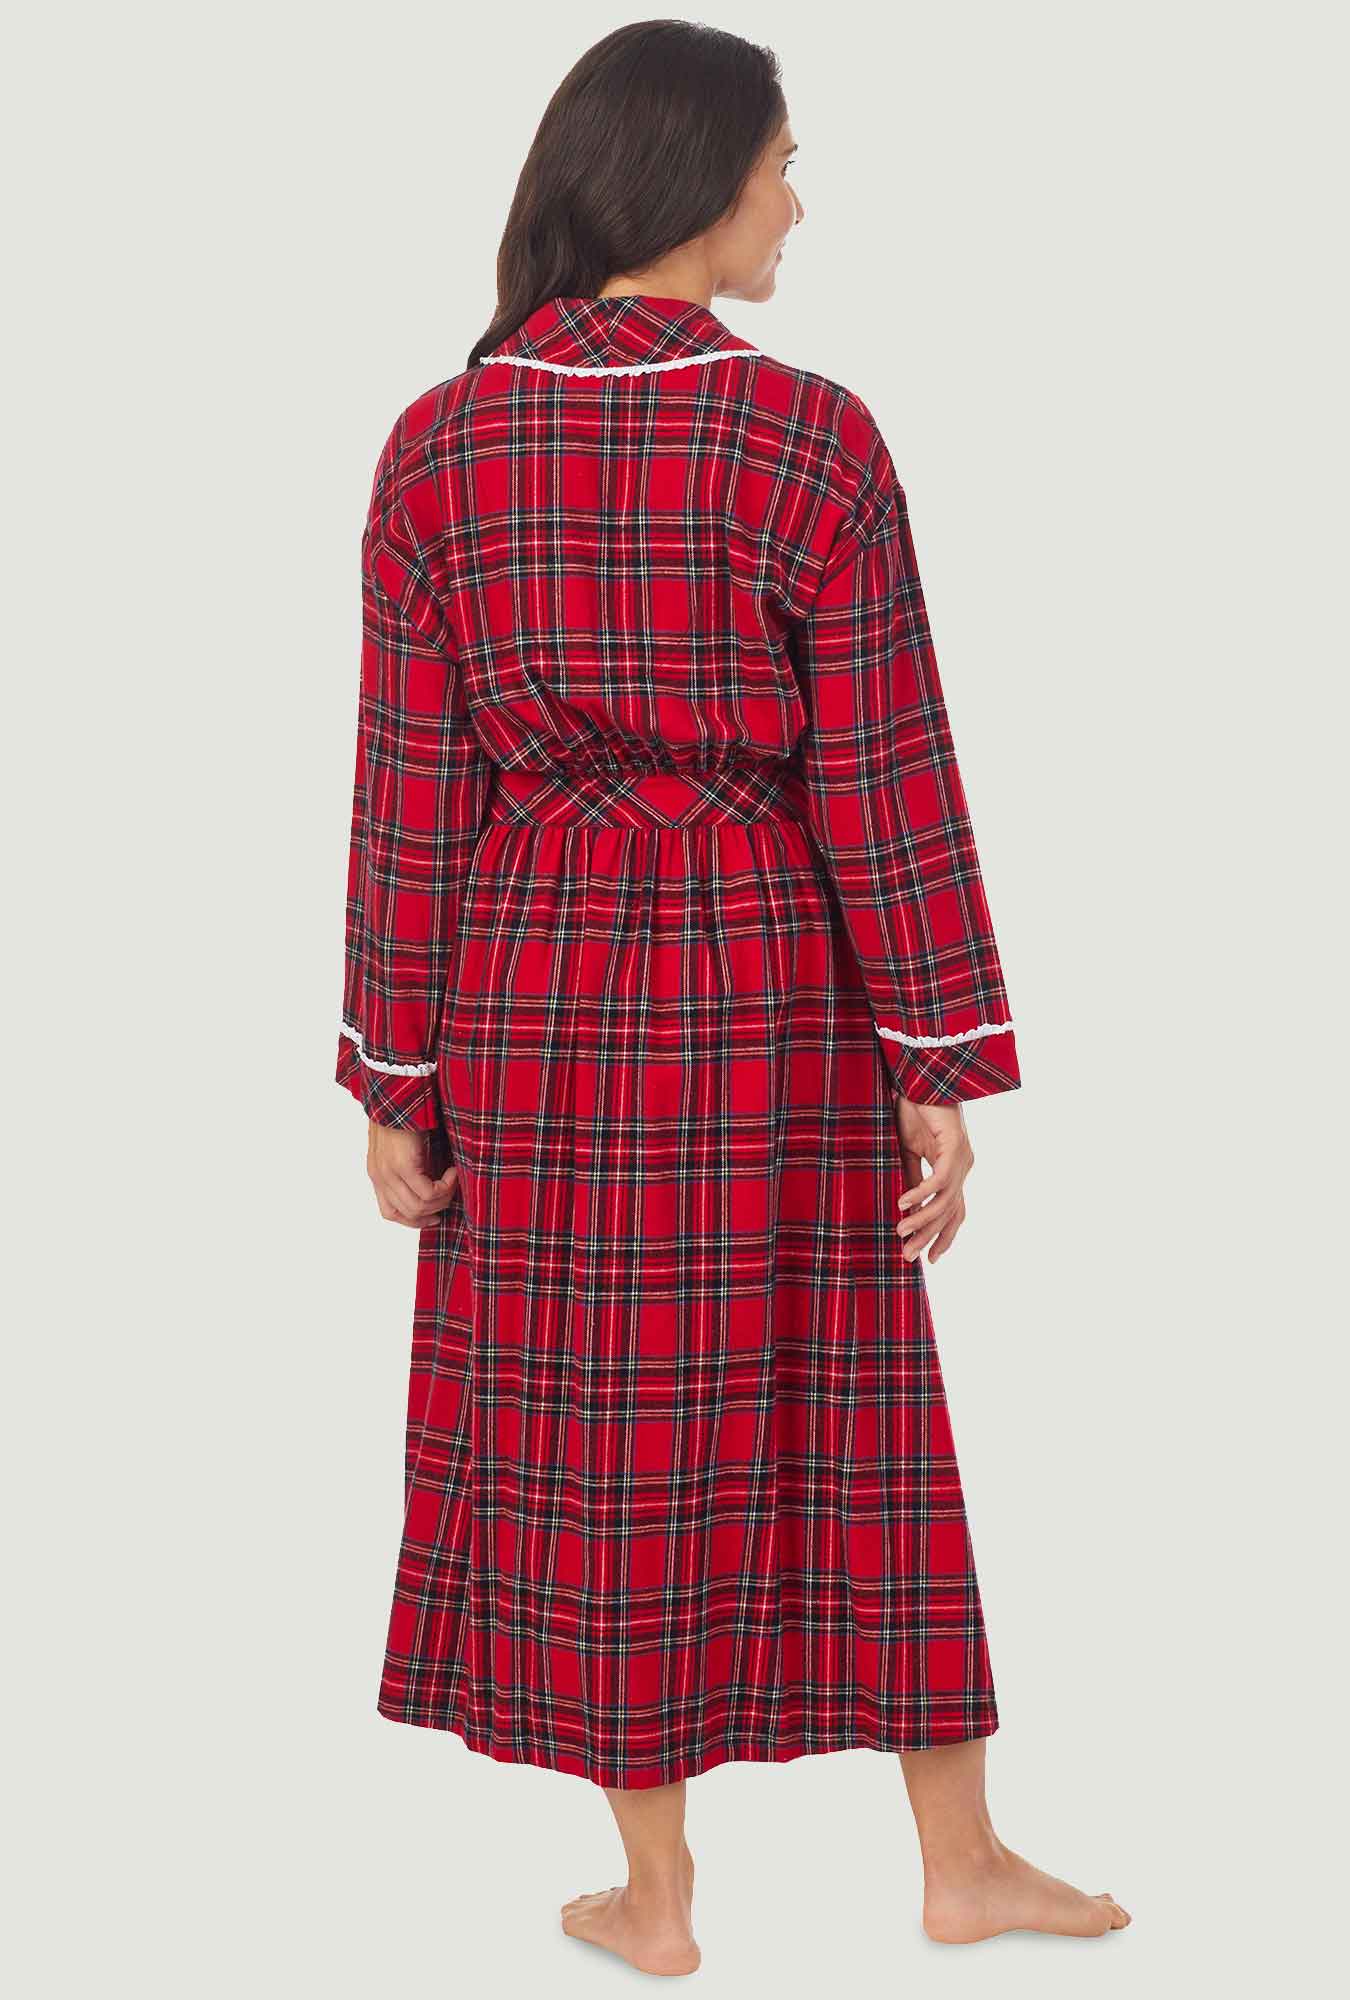 A lady wearing a red long sleeve tartan plaid flannel robe.